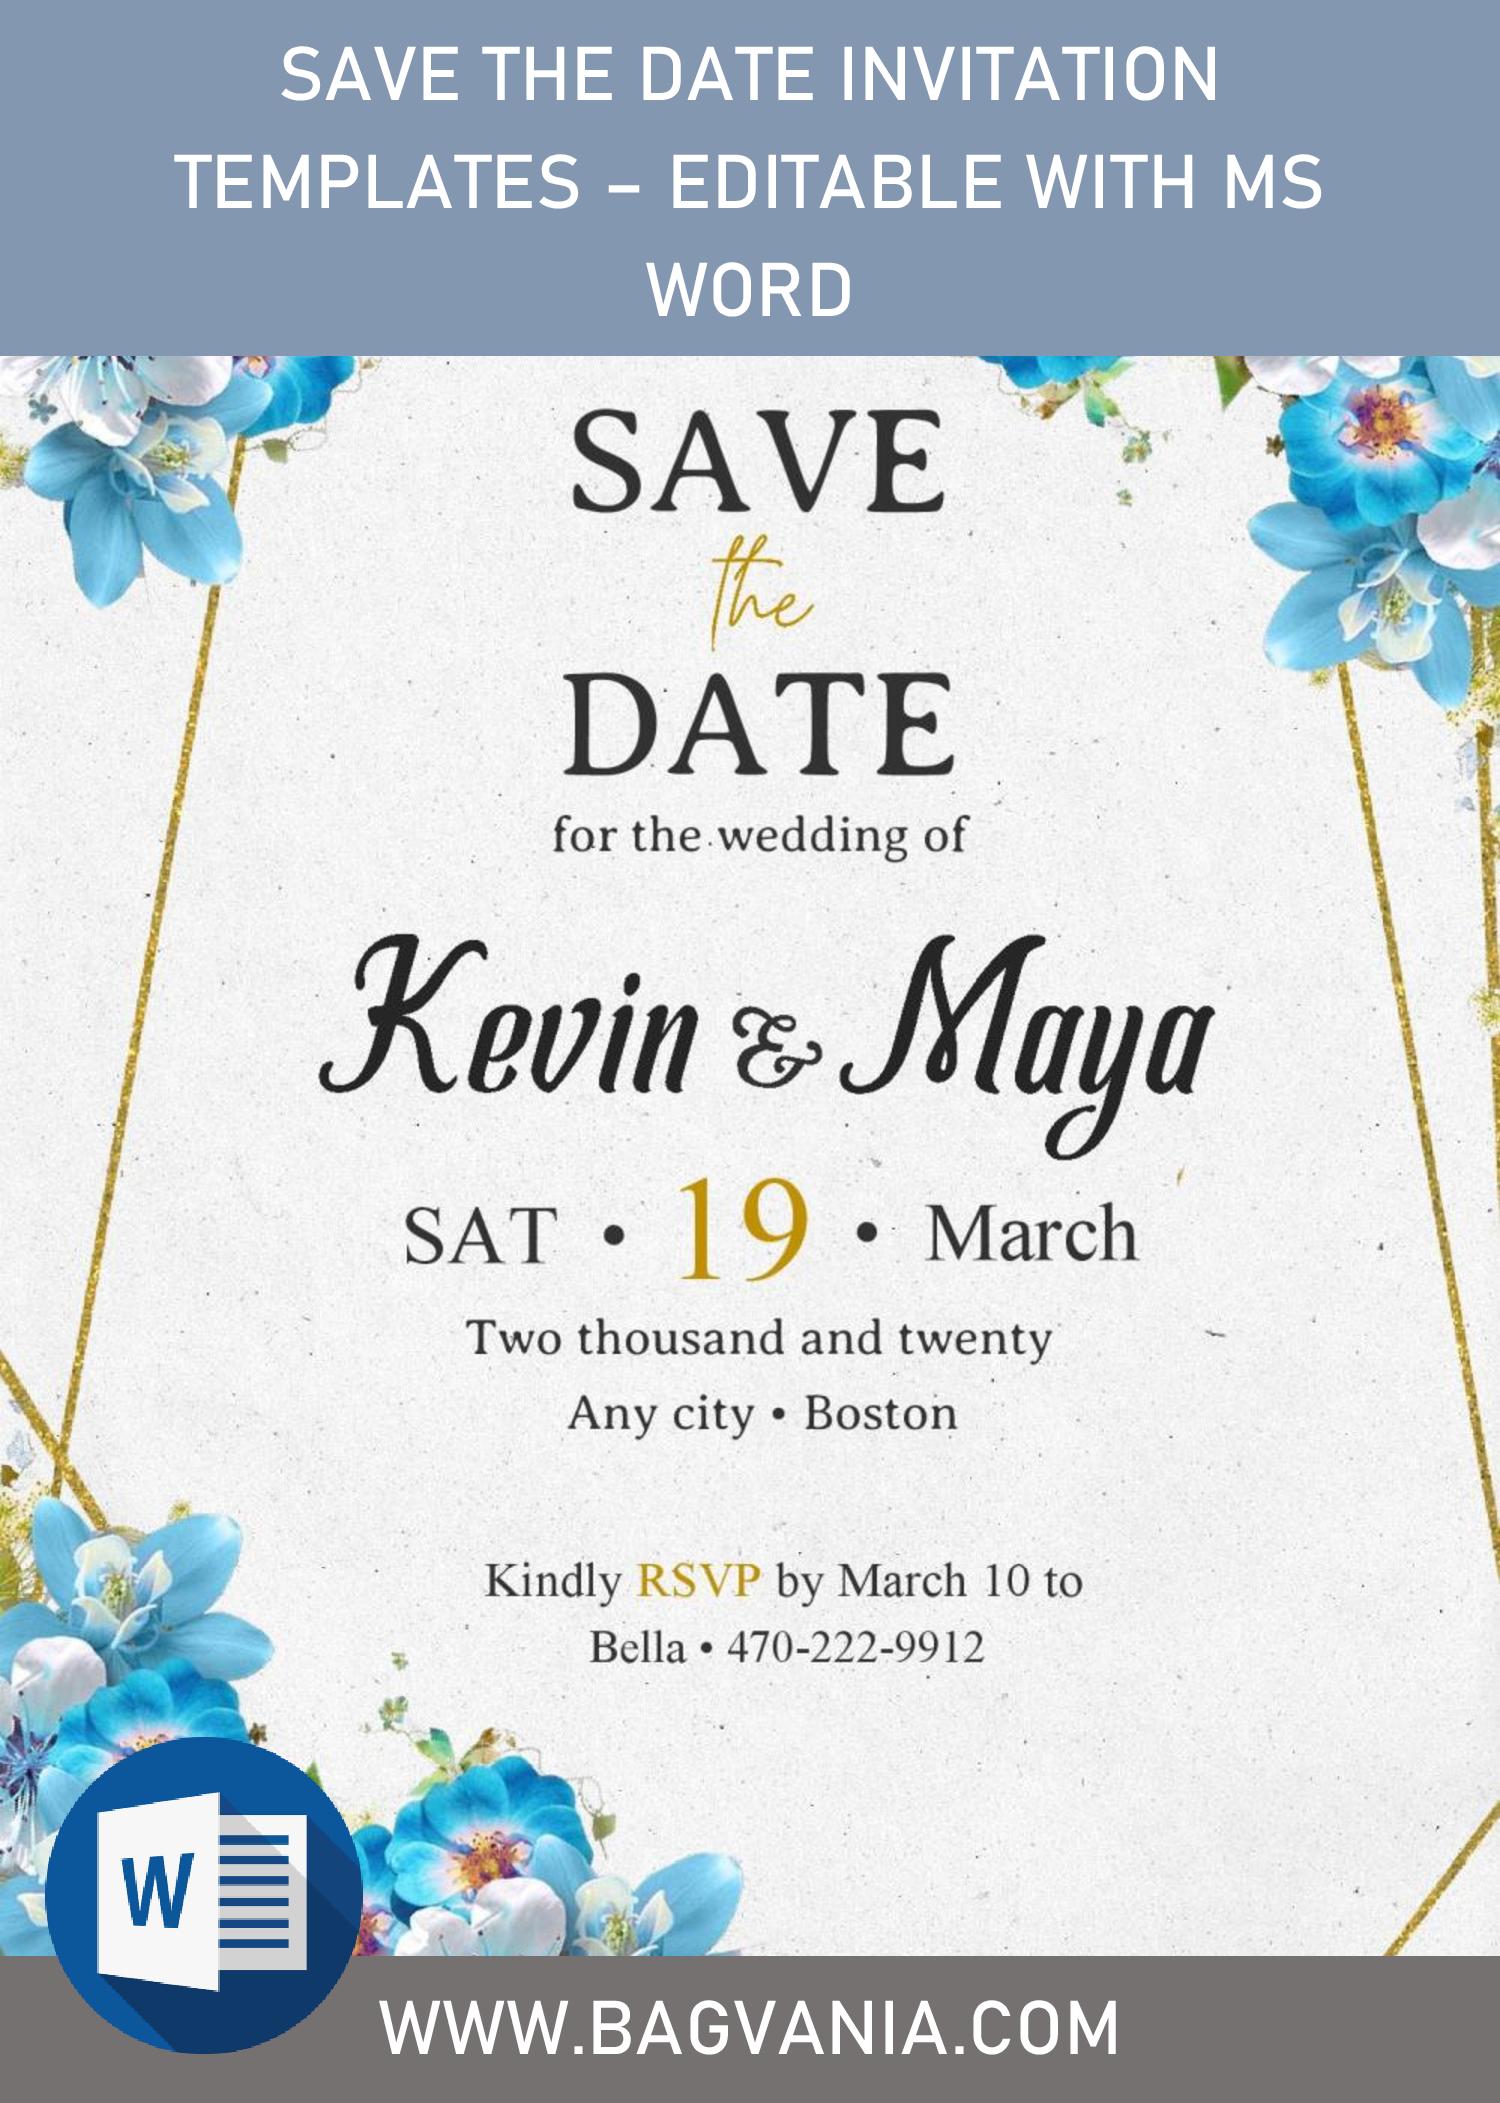 save-the-date-invitation-templates-editable-with-ms-word-free